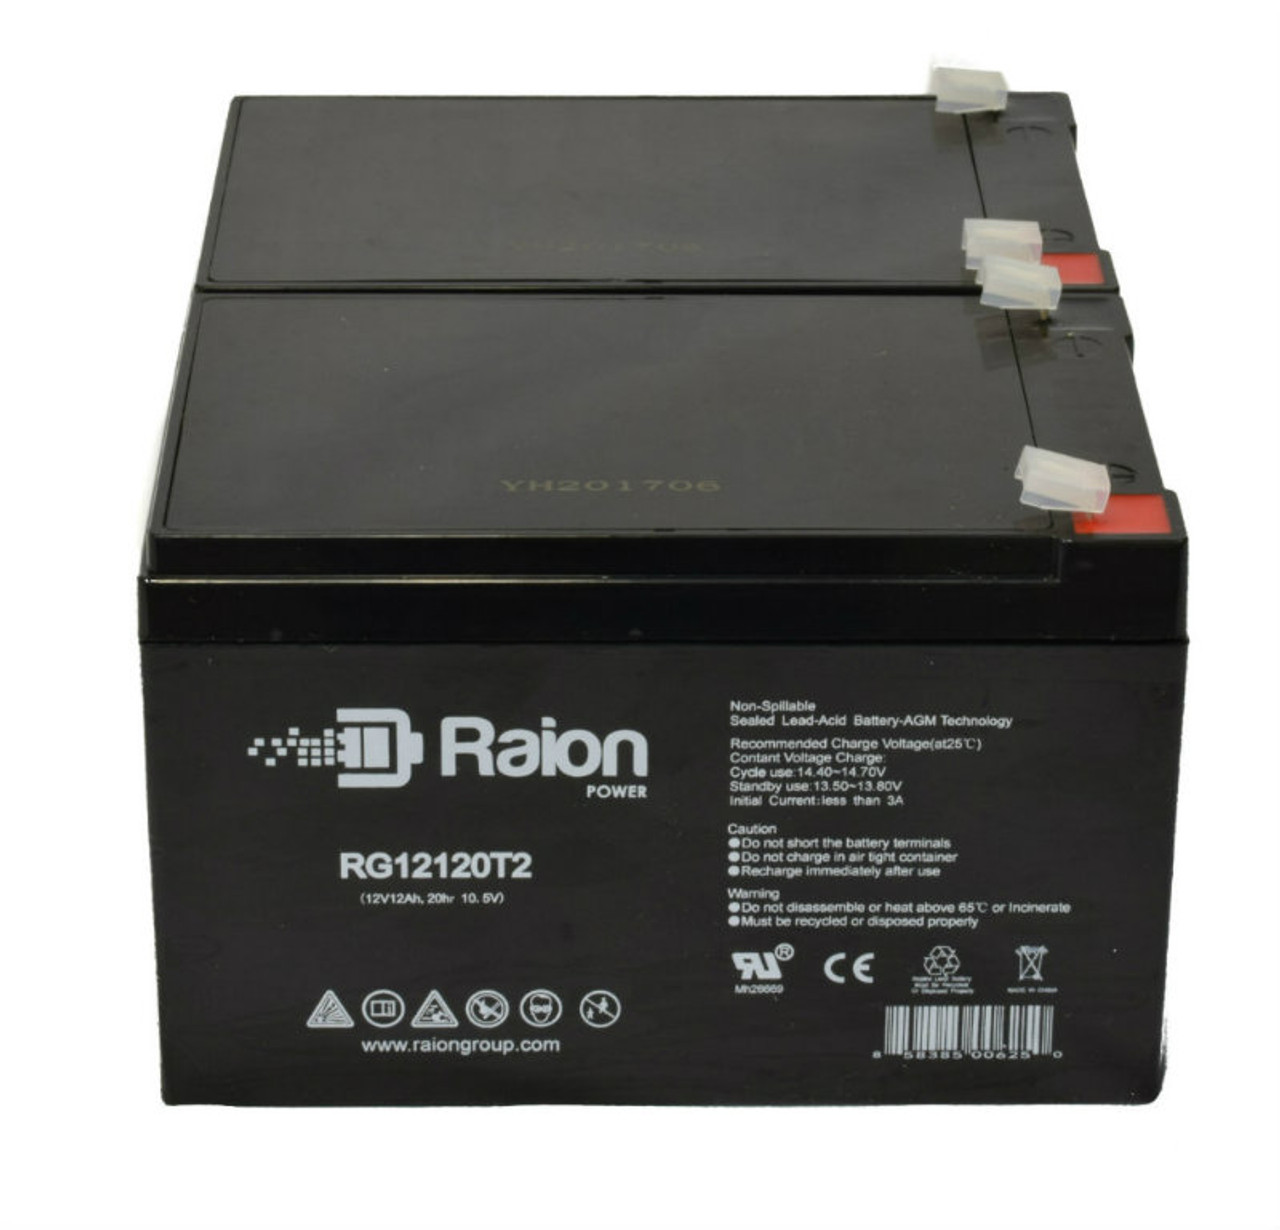 Raion Power 12V 12Ah Non-Spillable Compatible Replacement Battery for Oracle FS12120 - (2 Pack)